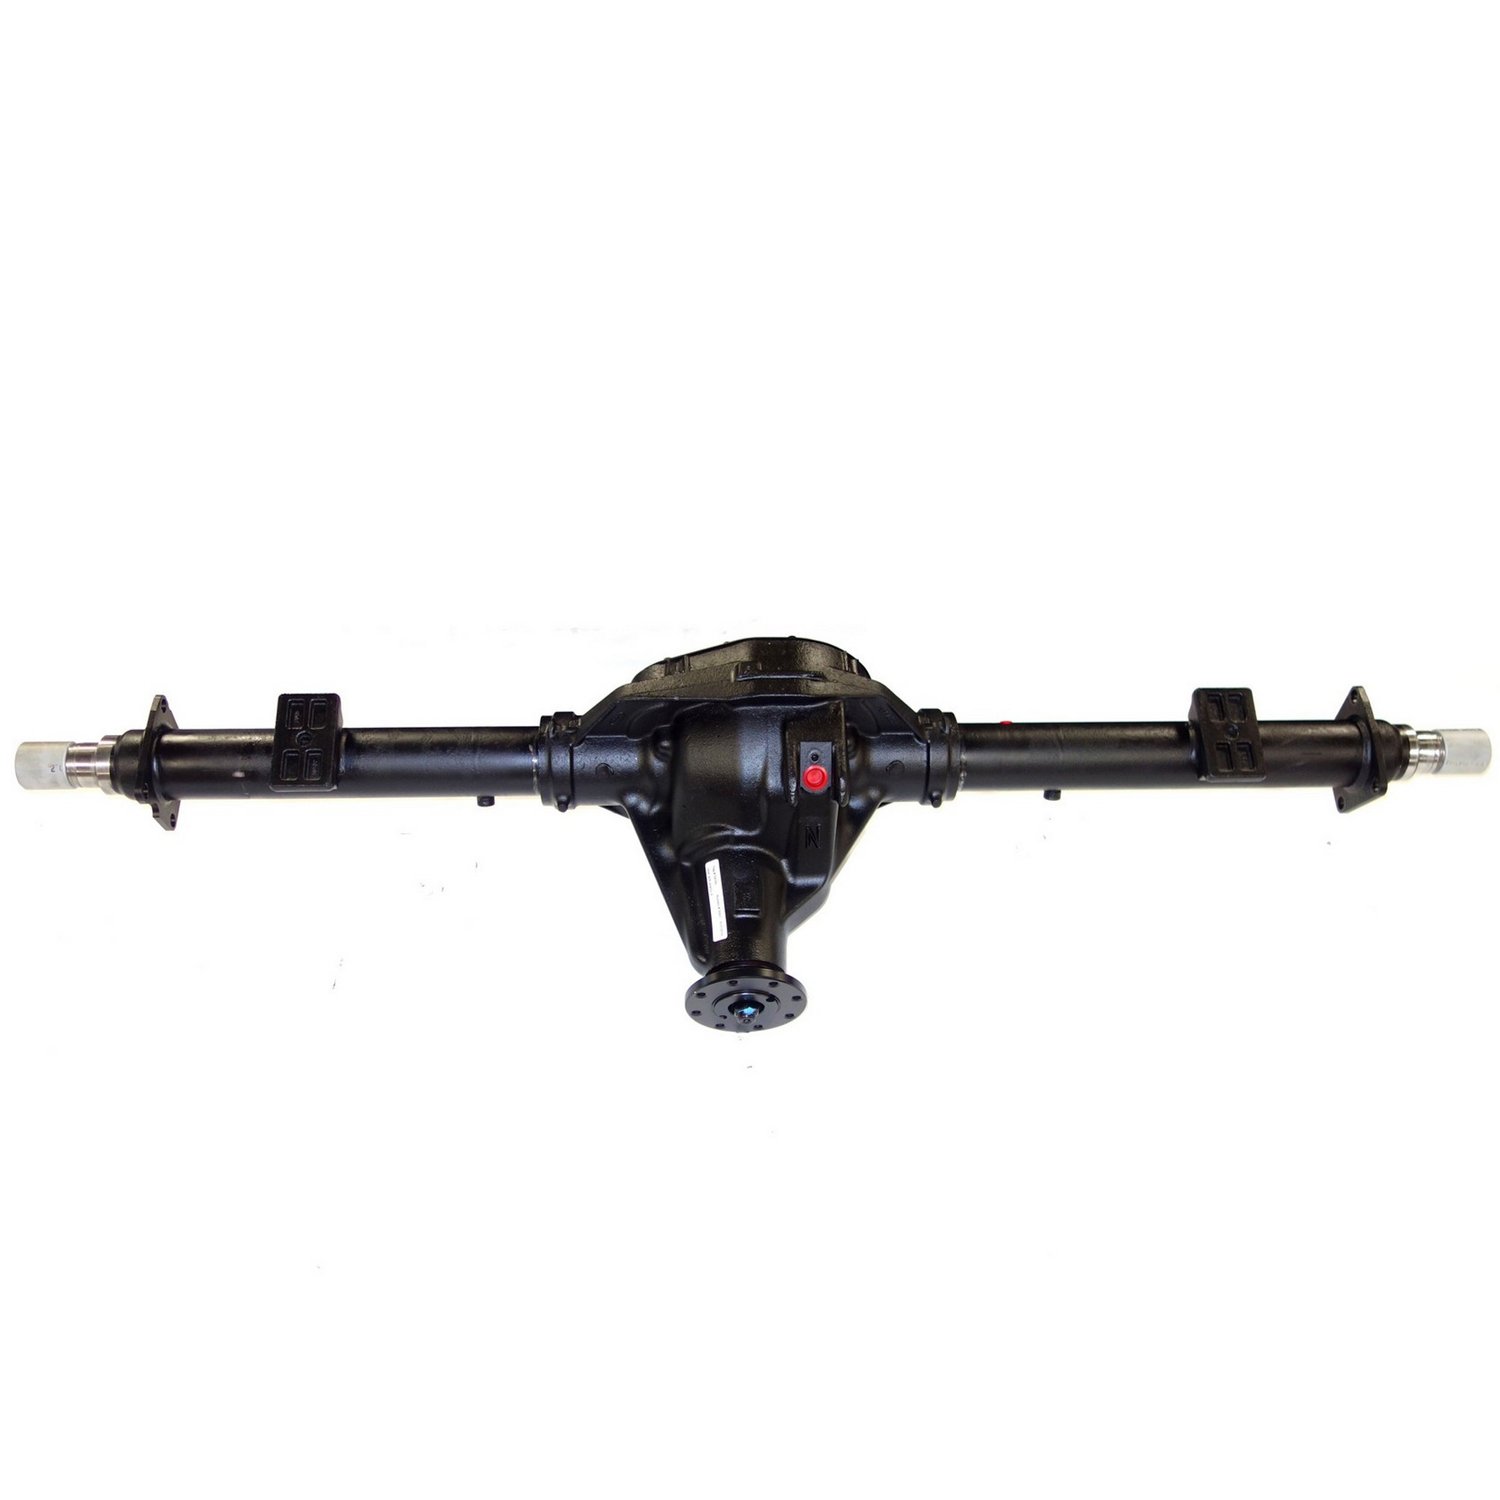 Remanufactured Complete Axle Assembly for 10.25" 87-97 F250 3.55 with ABS, Sf, Posi LSD